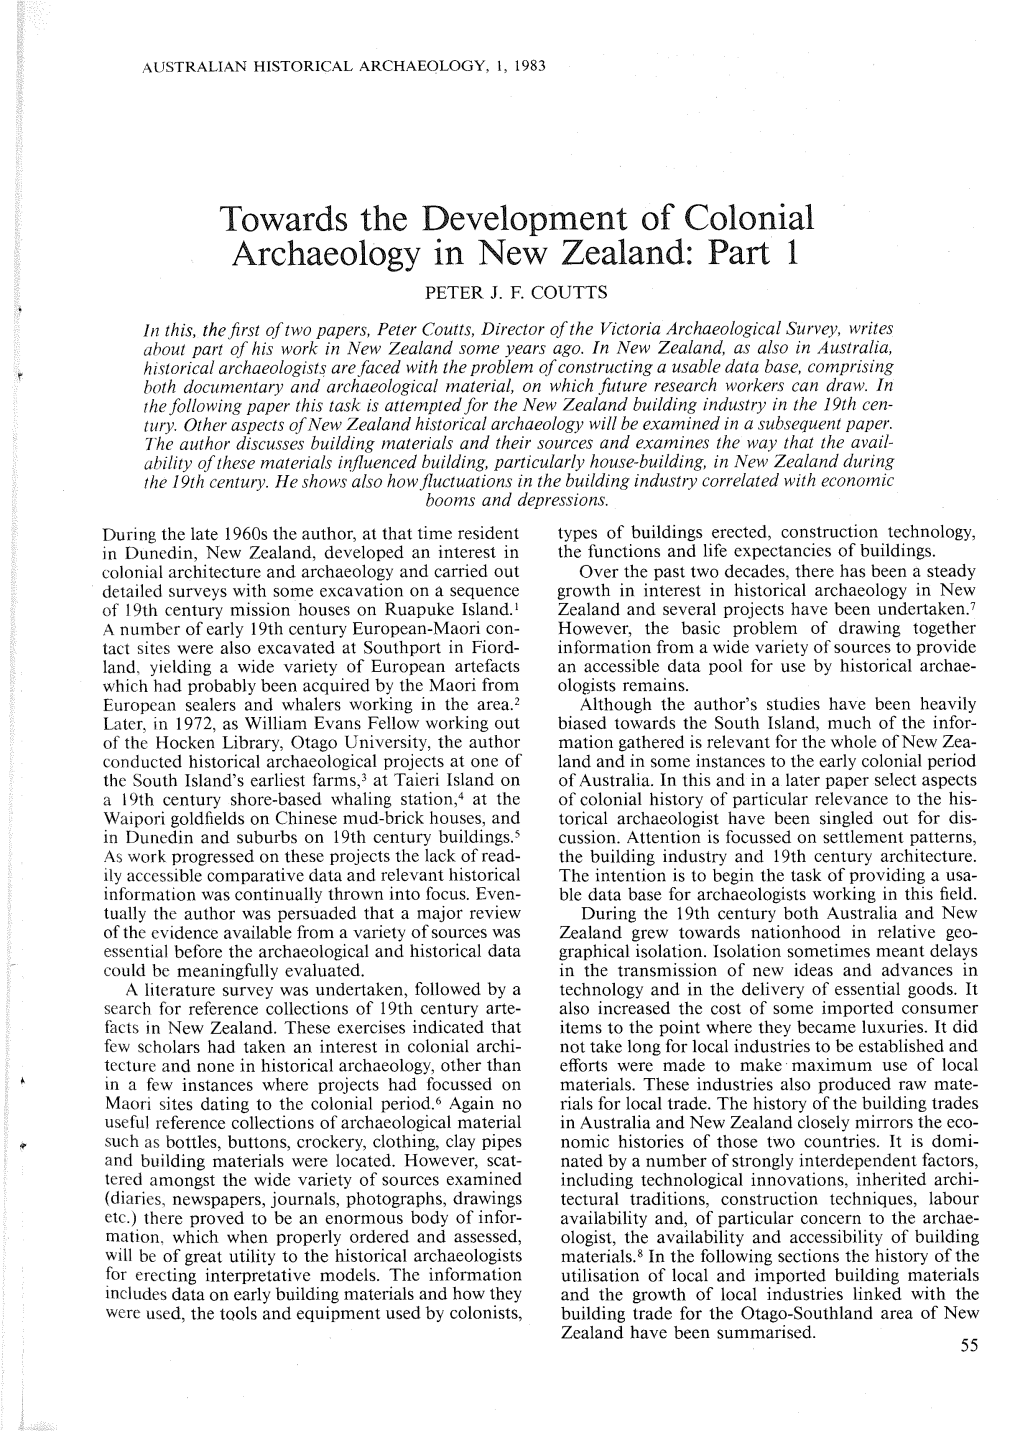 Towards the Development of Colonial Archaeology in New Zealand: Part 1 PETER J